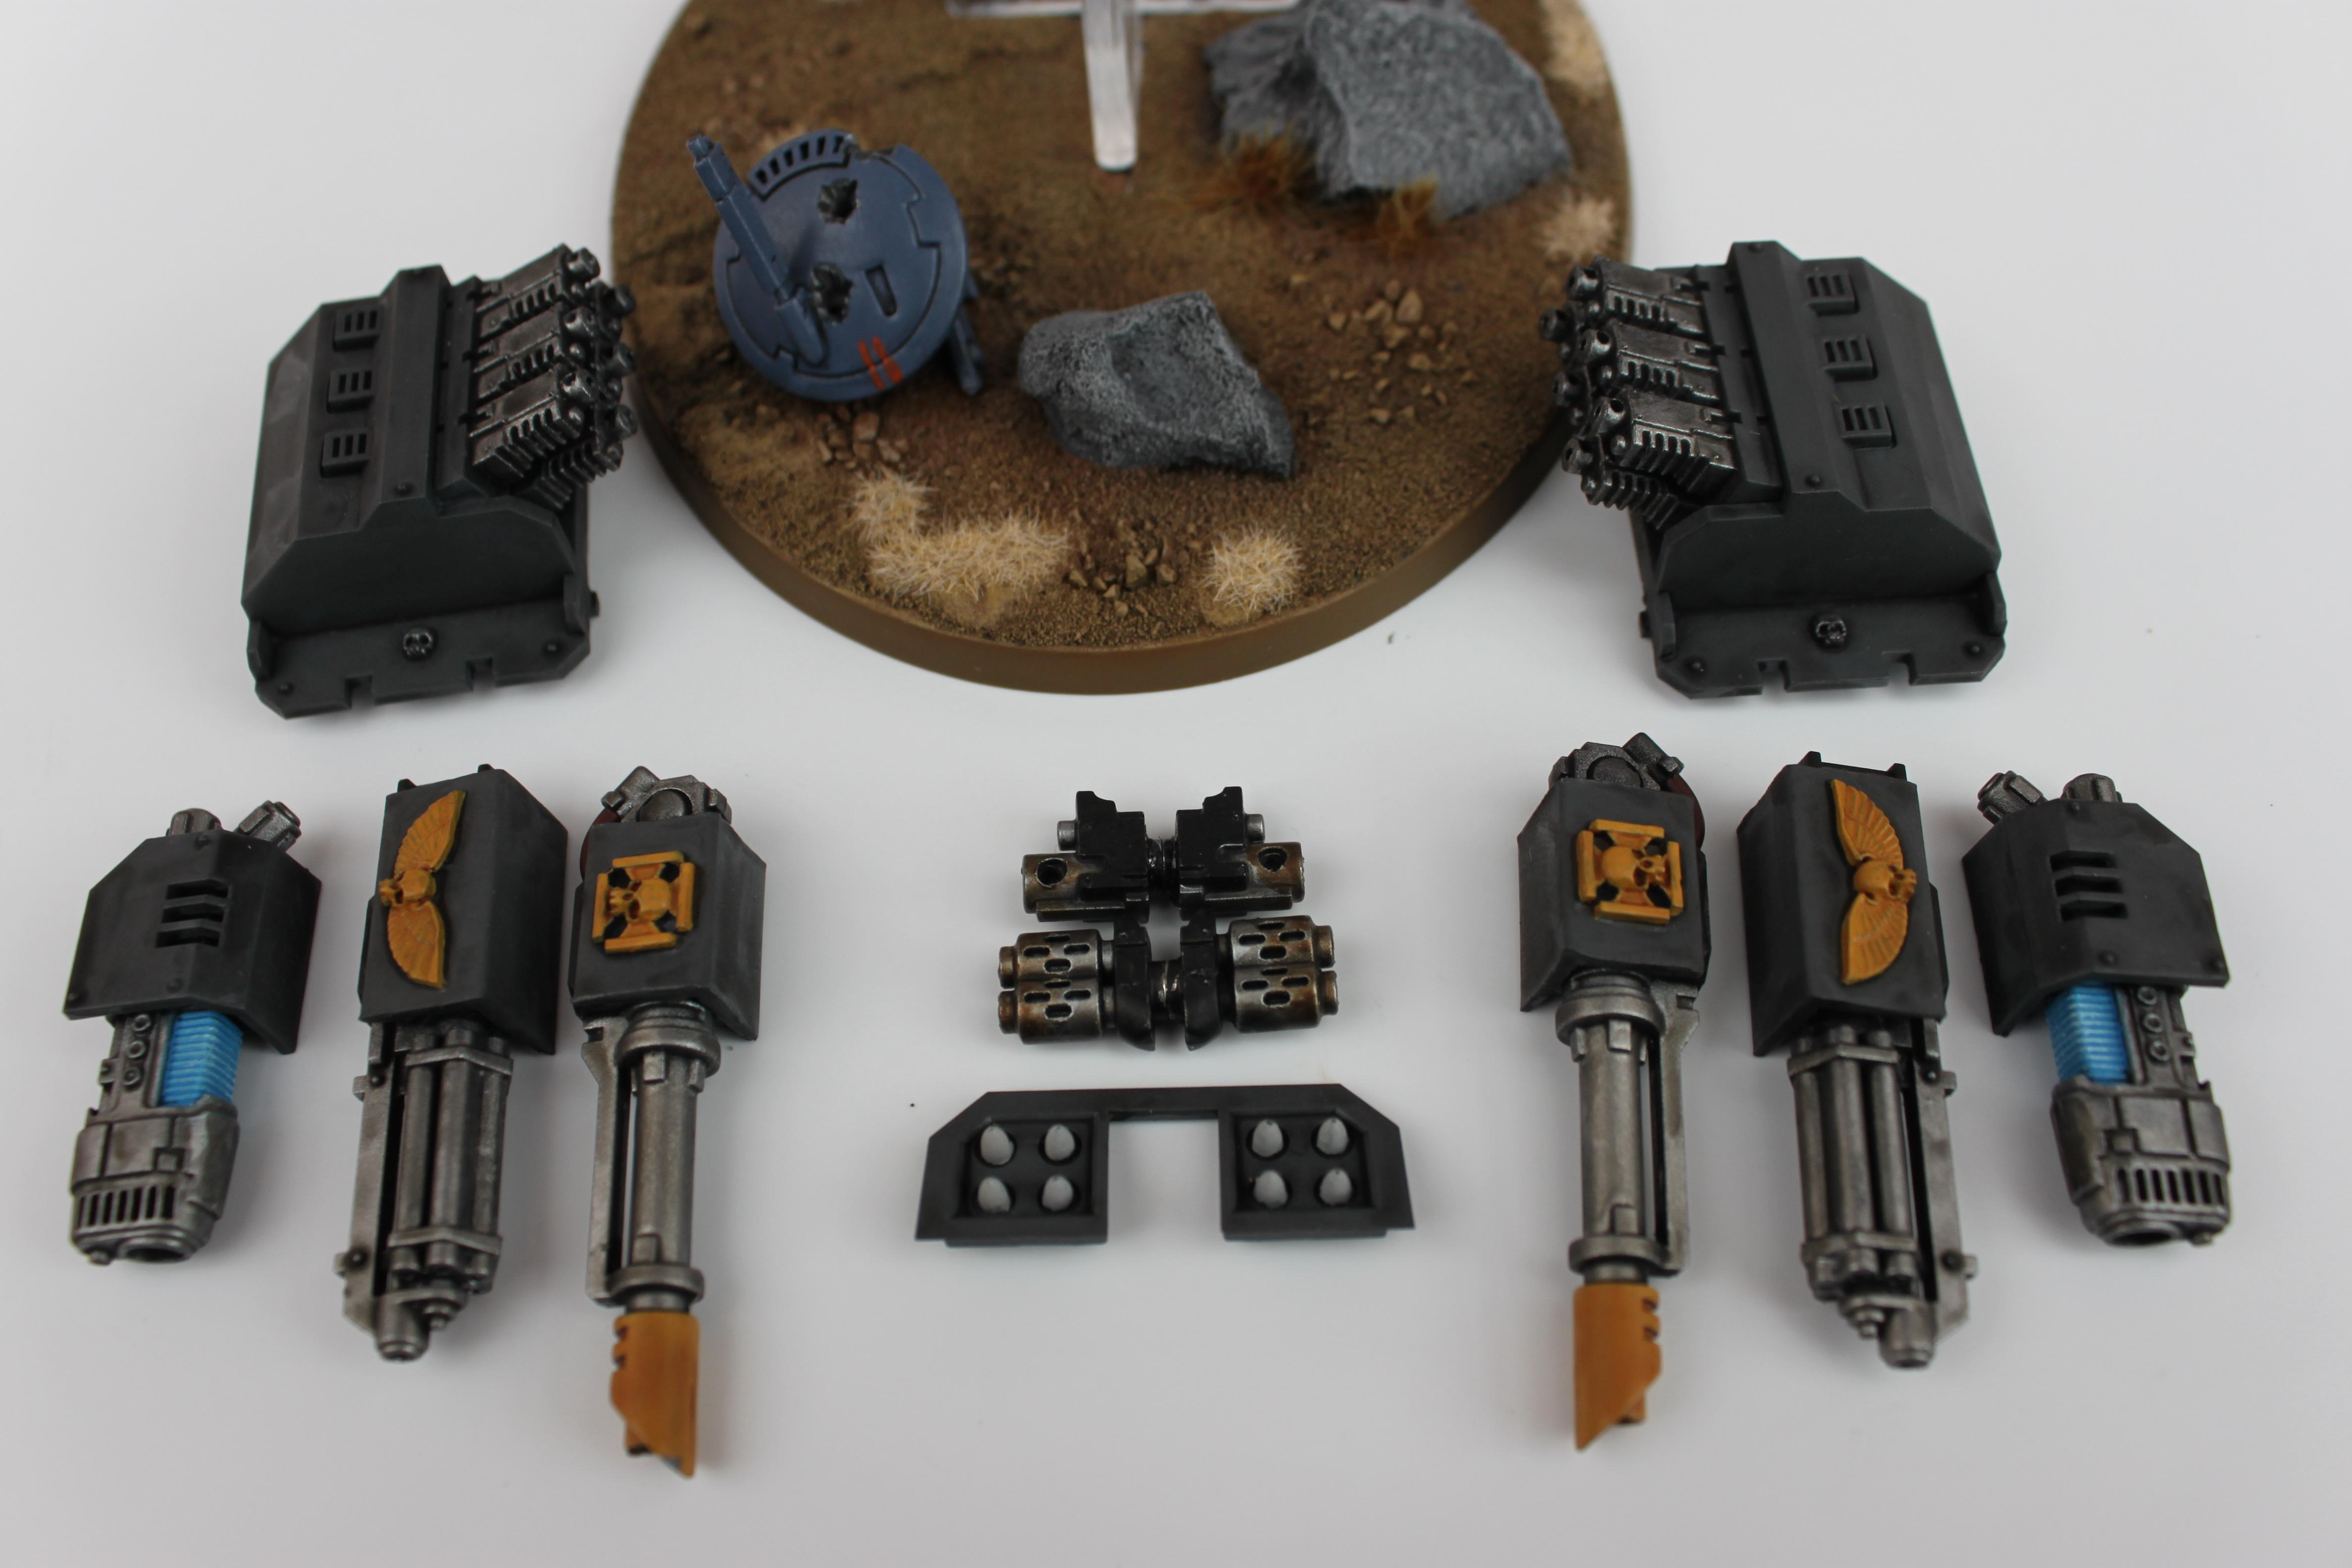 Magnetised, Red Scorpions, Space Marines, Stormraven, Warhammer 40,000, Weapon Options